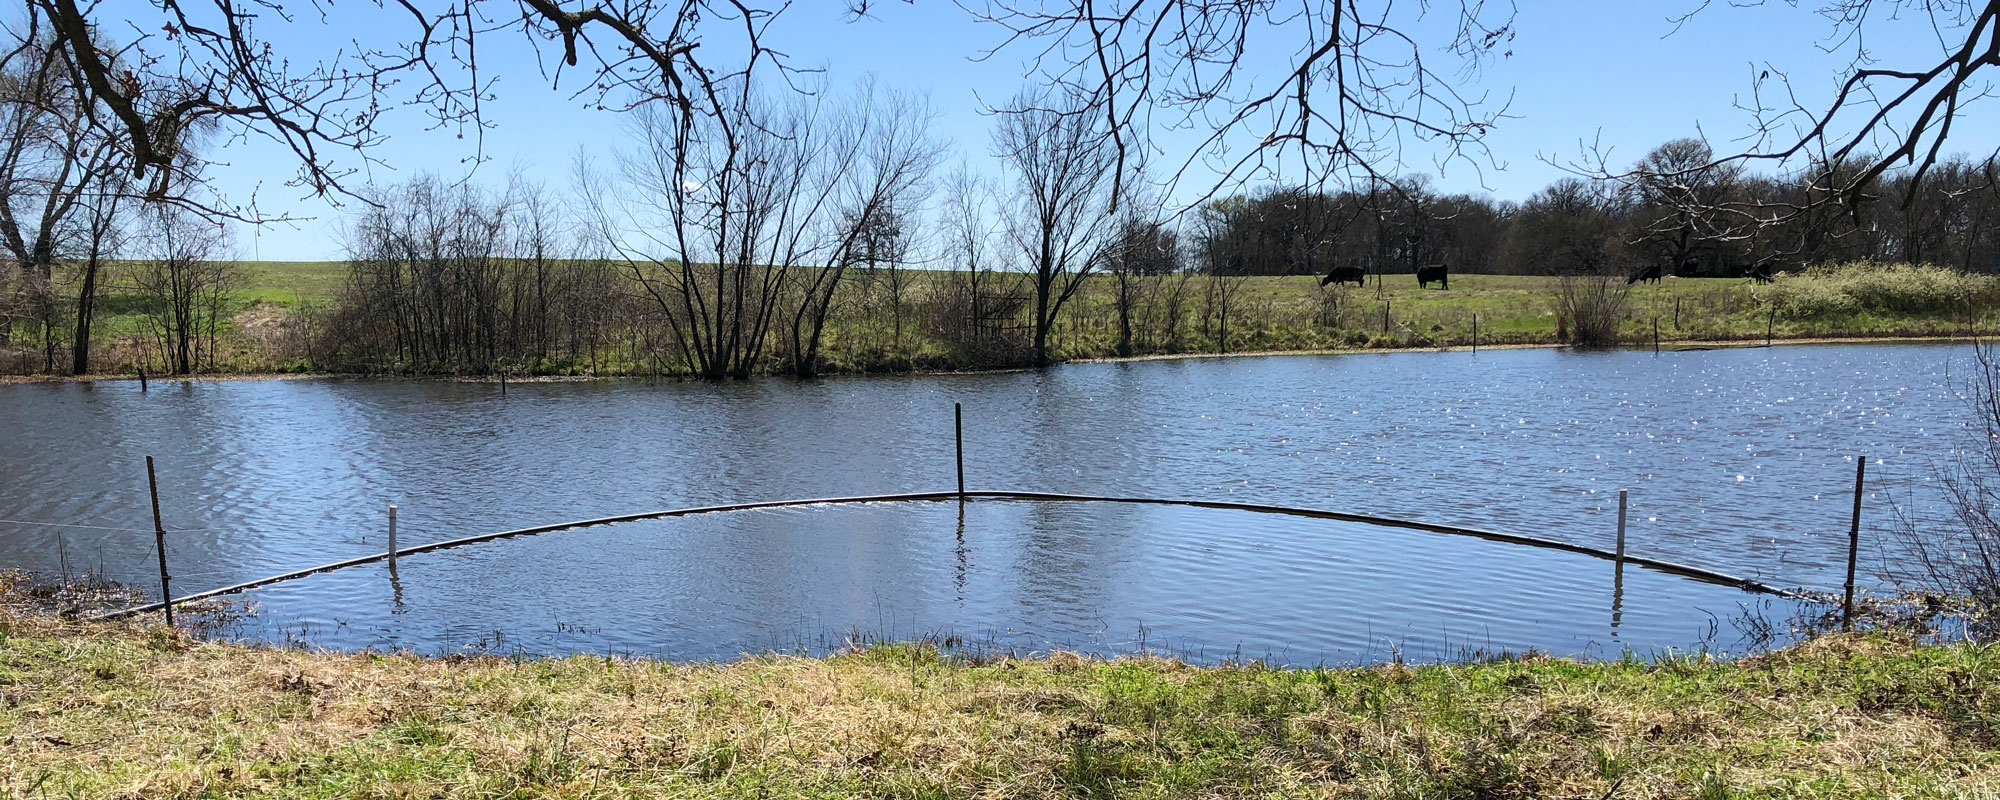 Pond fencing at access point